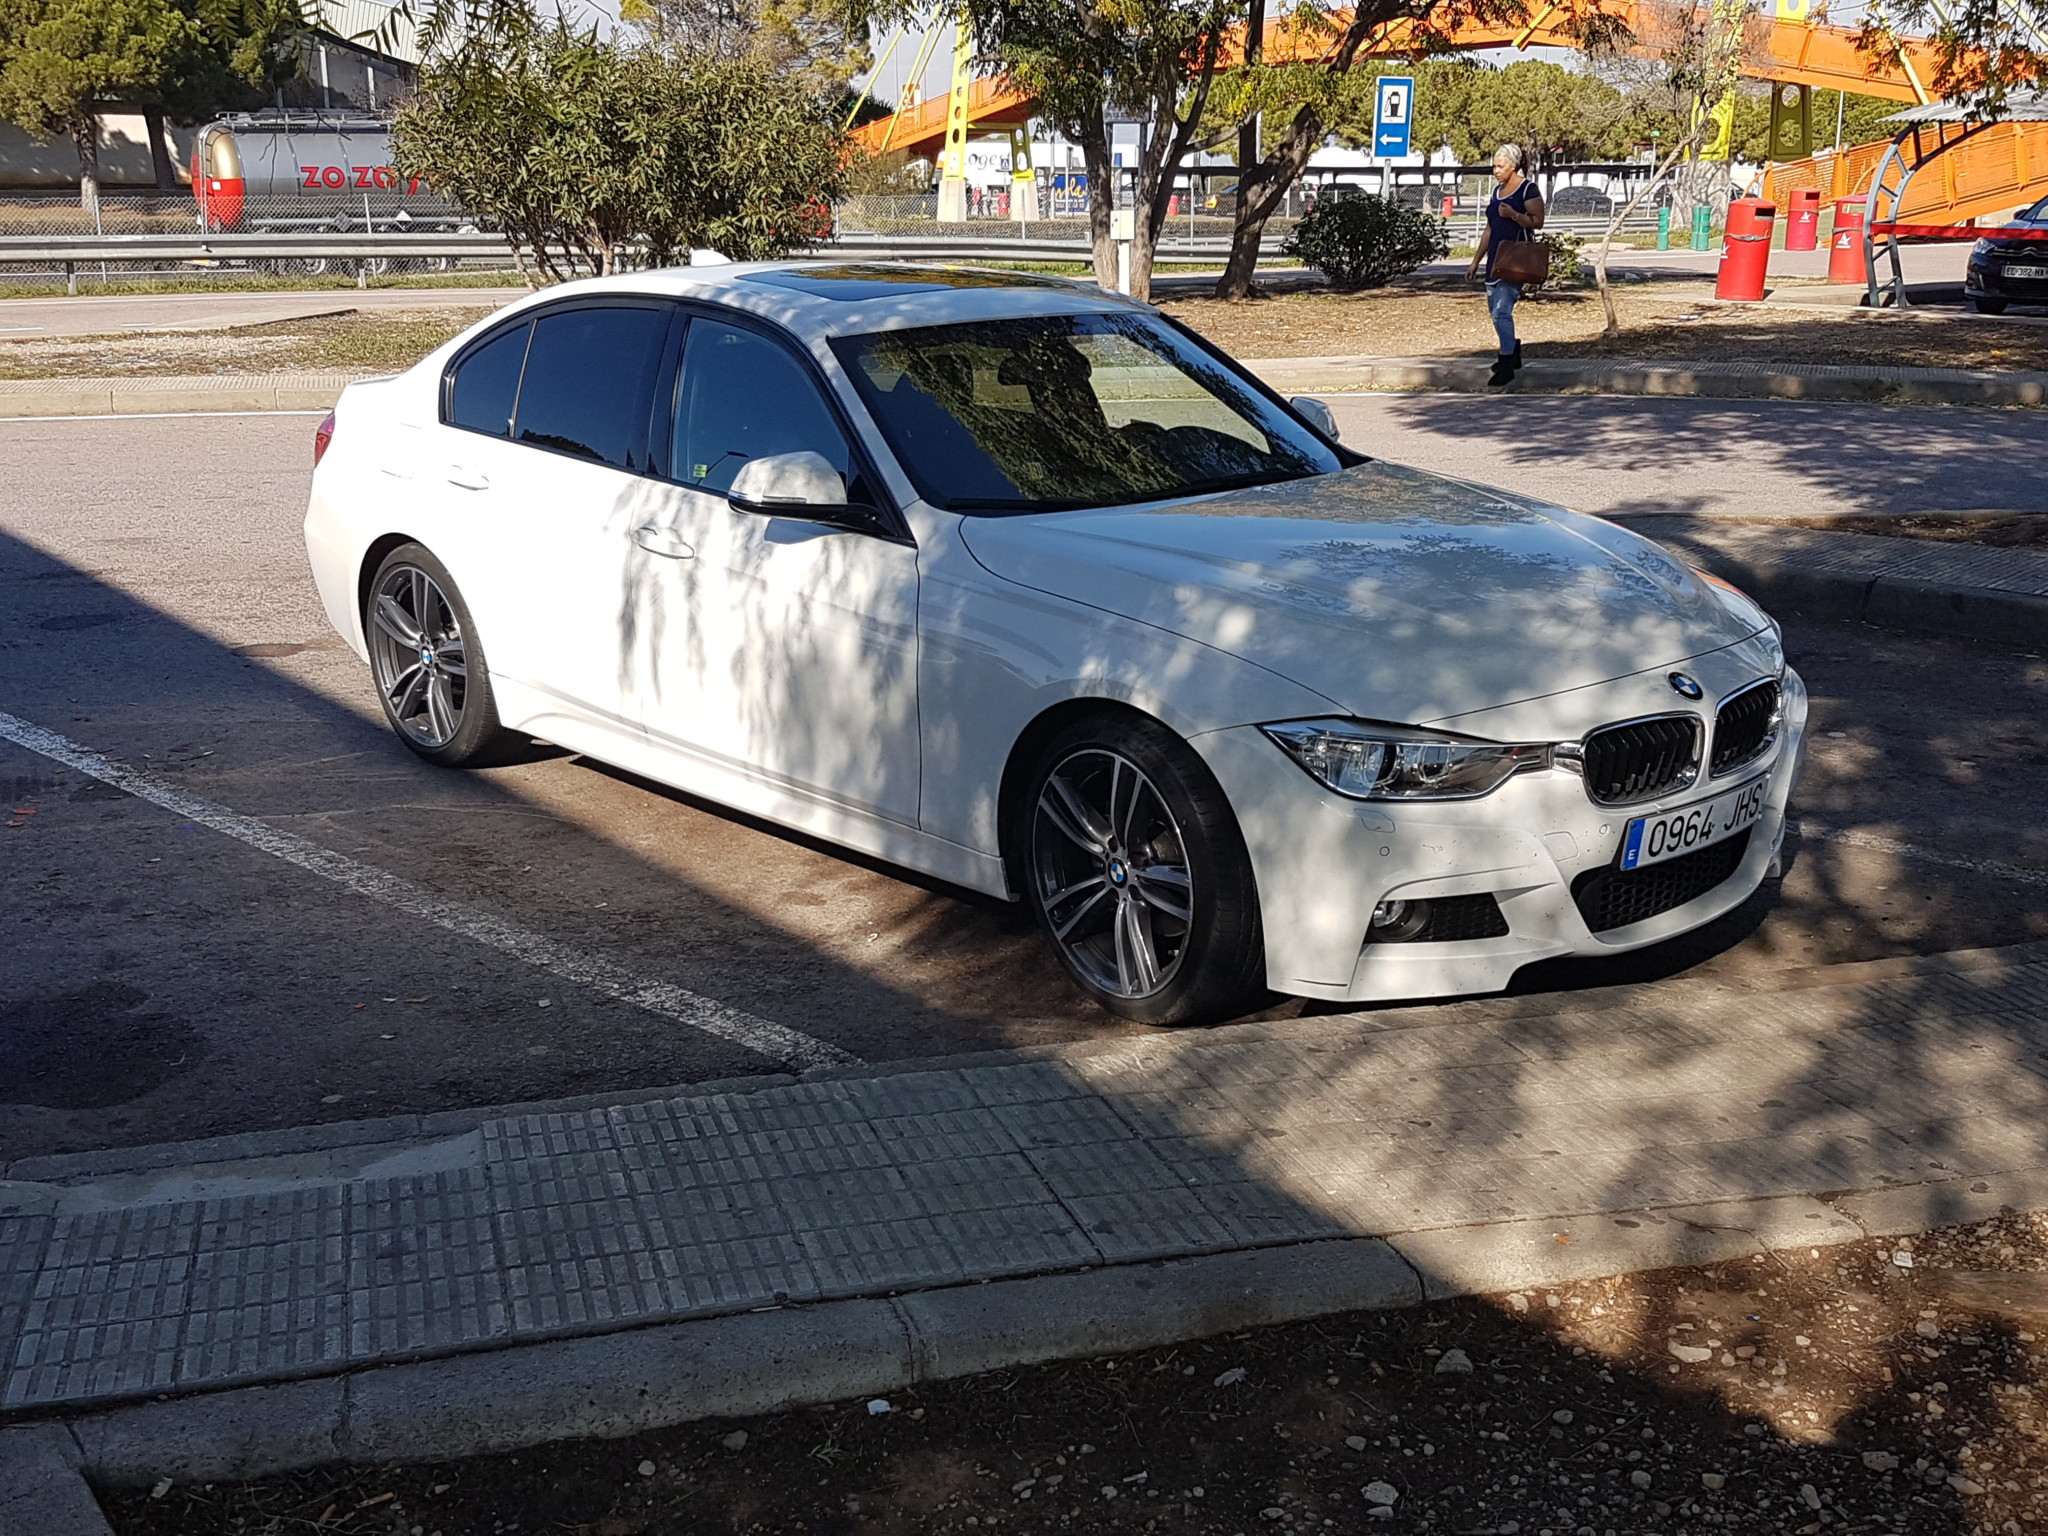 BMW 320d That We Drove to Barcelona